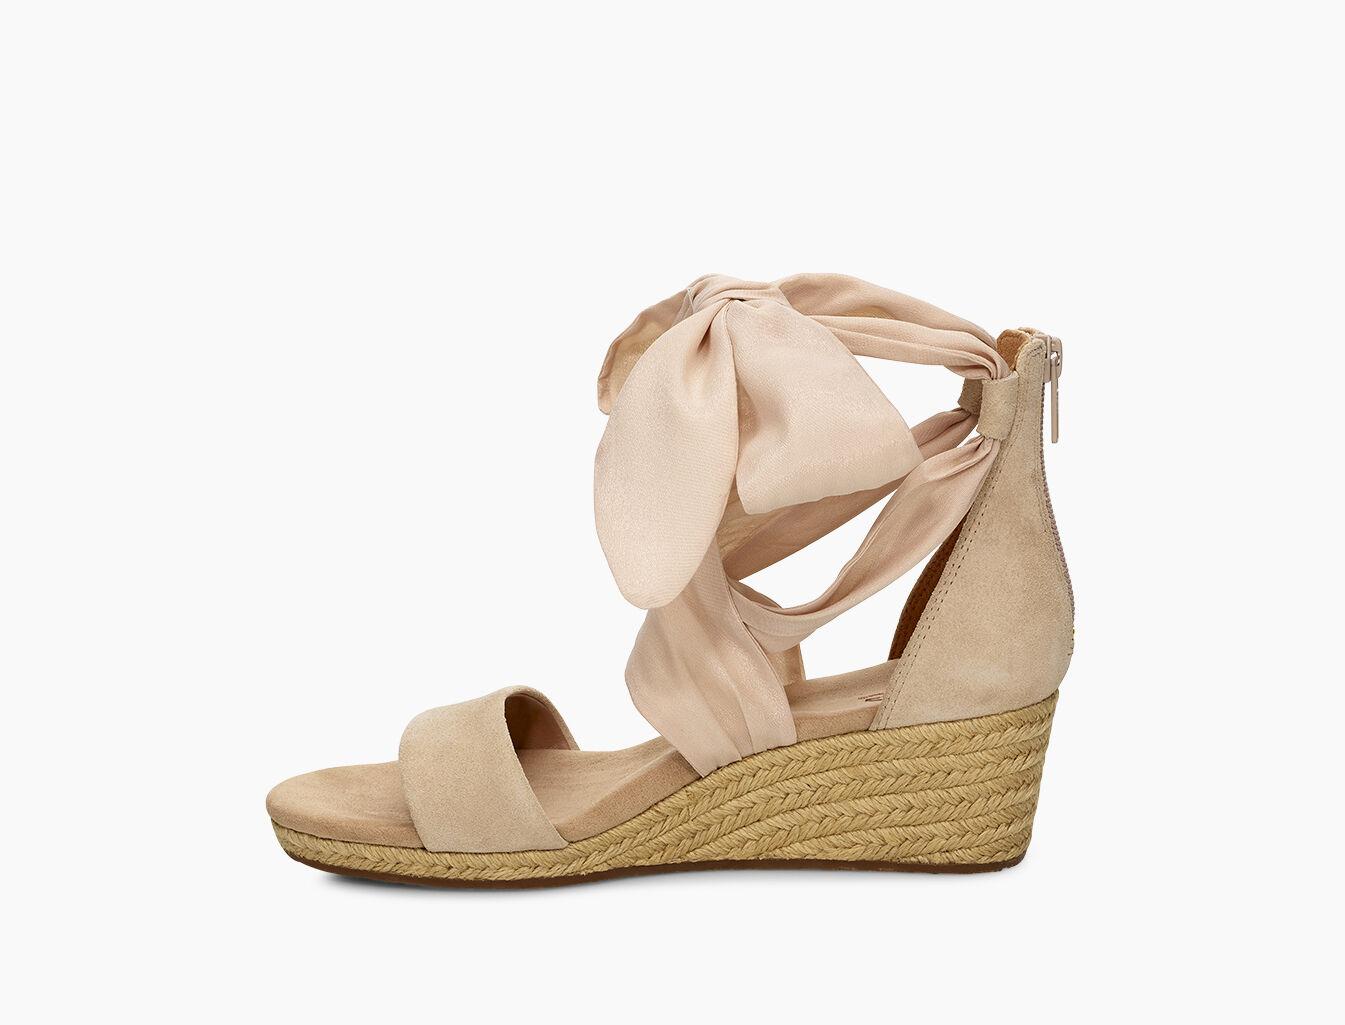 UGG Wedge Sandals Trina Textile in Natural | Lyst